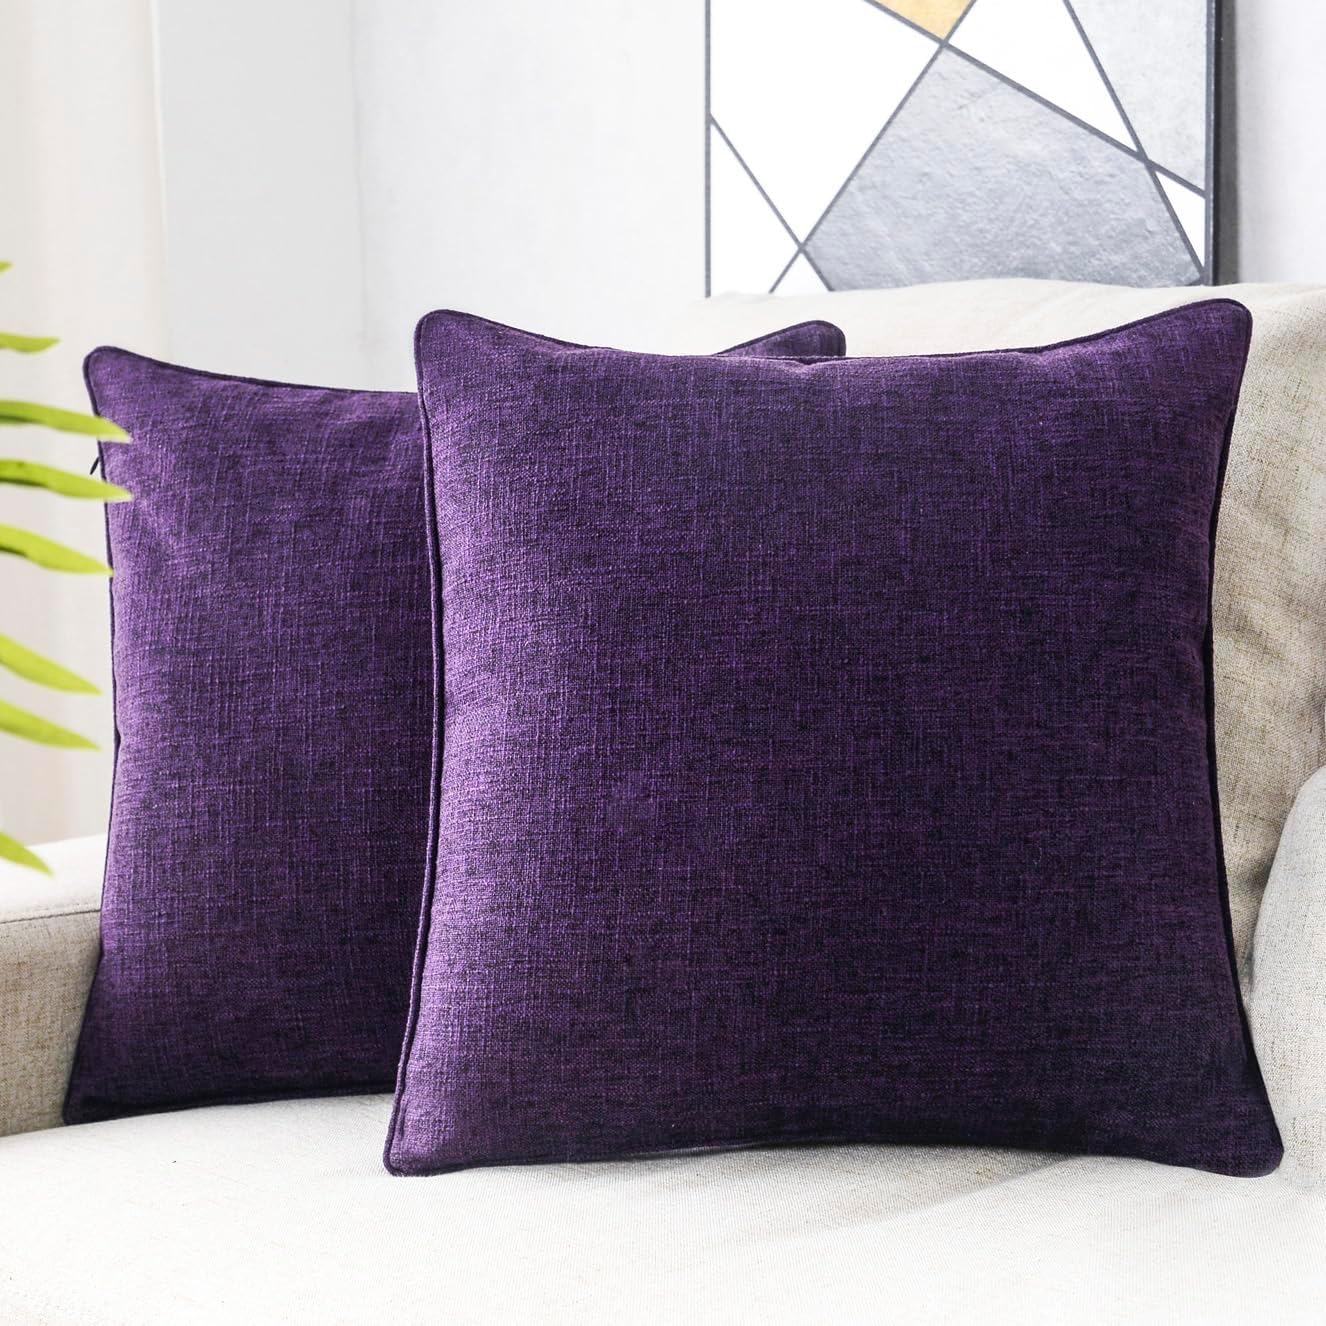 HPUK Linen Throw Pillow Covers Pack of 2, 18x18 Inch Accent Cushion Covers for Living Room, Bedroom, Decorative Solid Color Pillow Covers for Couch, Sofa, Chair, Purple